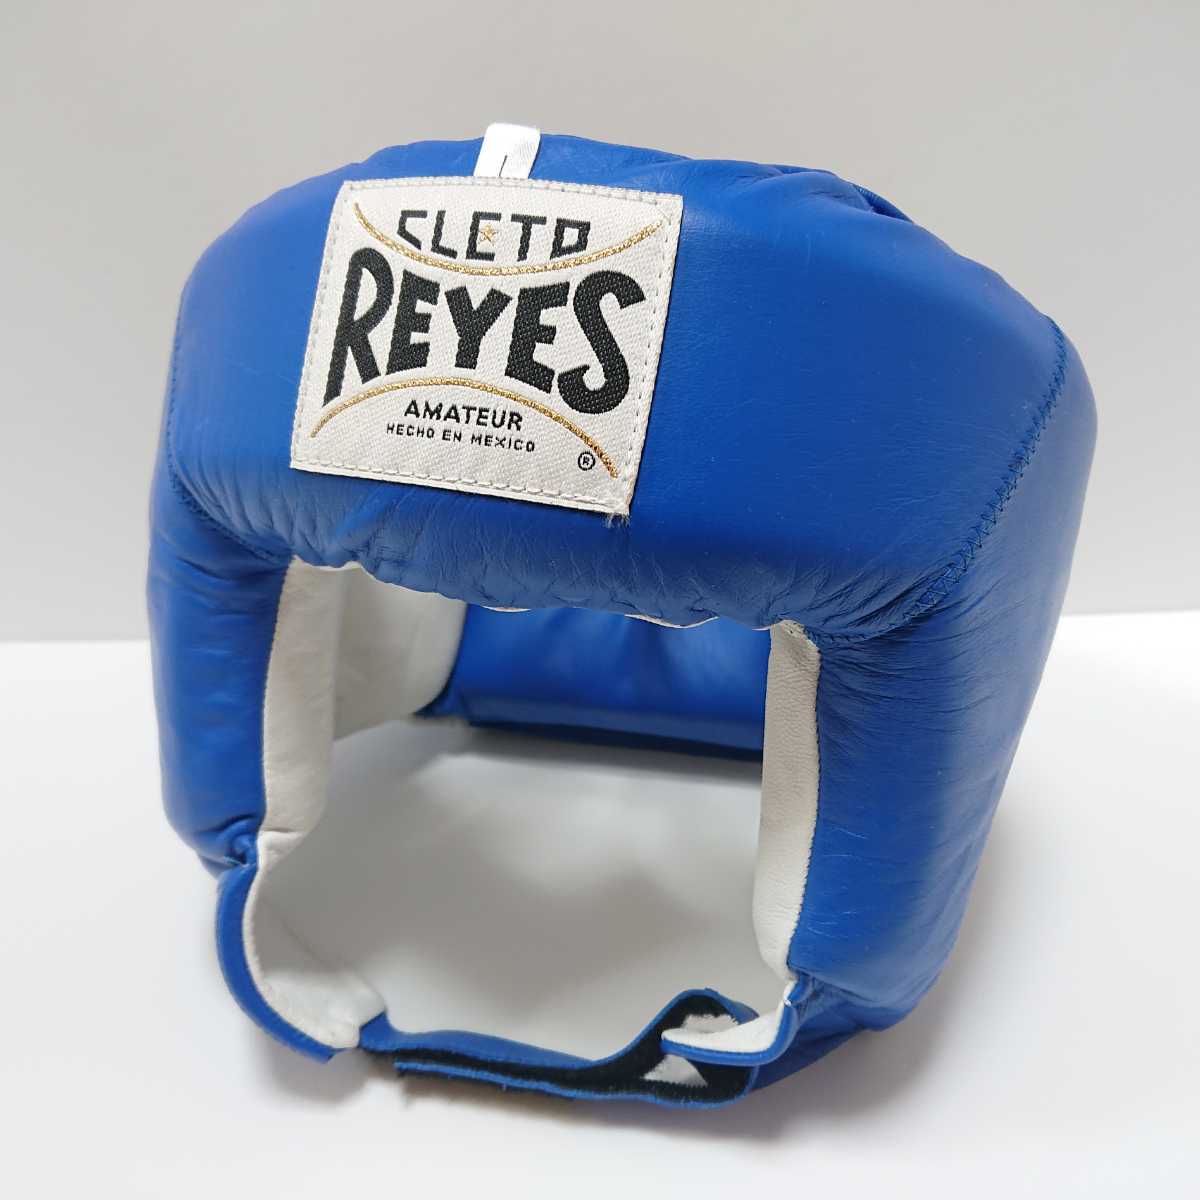 CLETO REYESkre tray es Ray jes head guard wide Viewtor ipL size blue real leather made boxing headgear MEXICO Mexico 